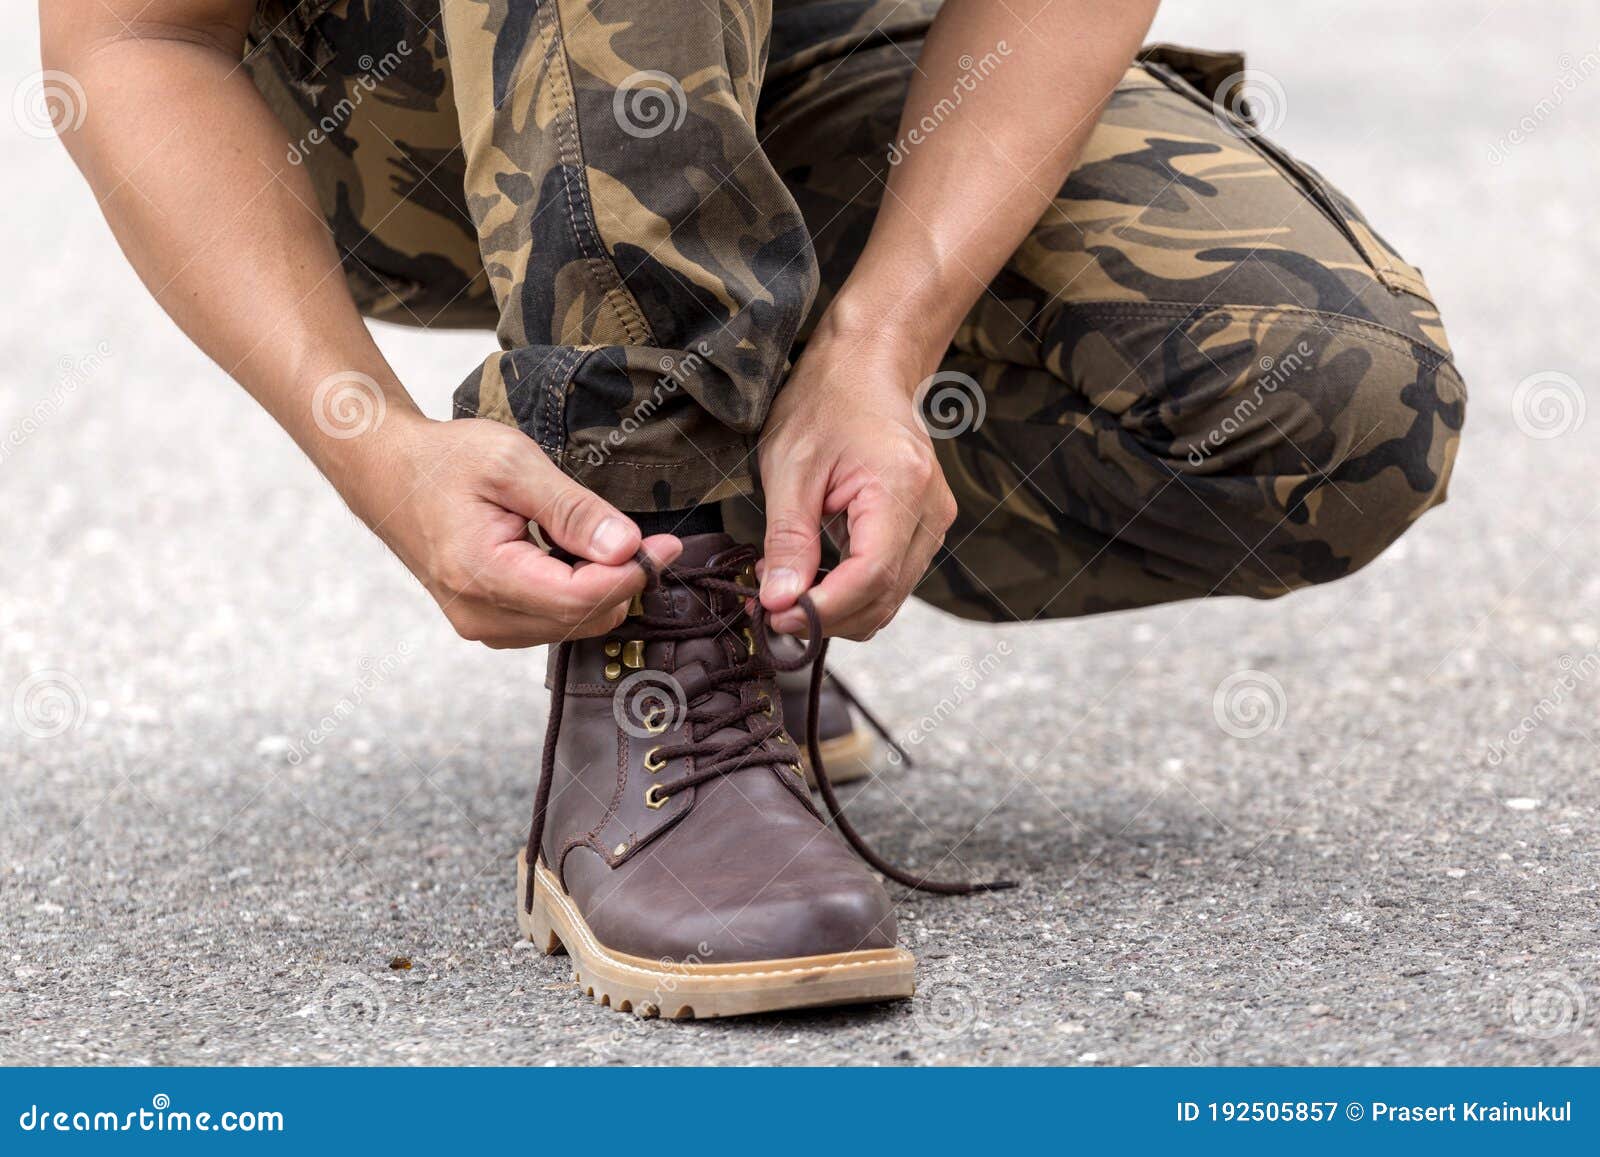 man wearing cargo pants tying laces leather shoes boot man wearing cargo pants tying laces leather shoes 192505857